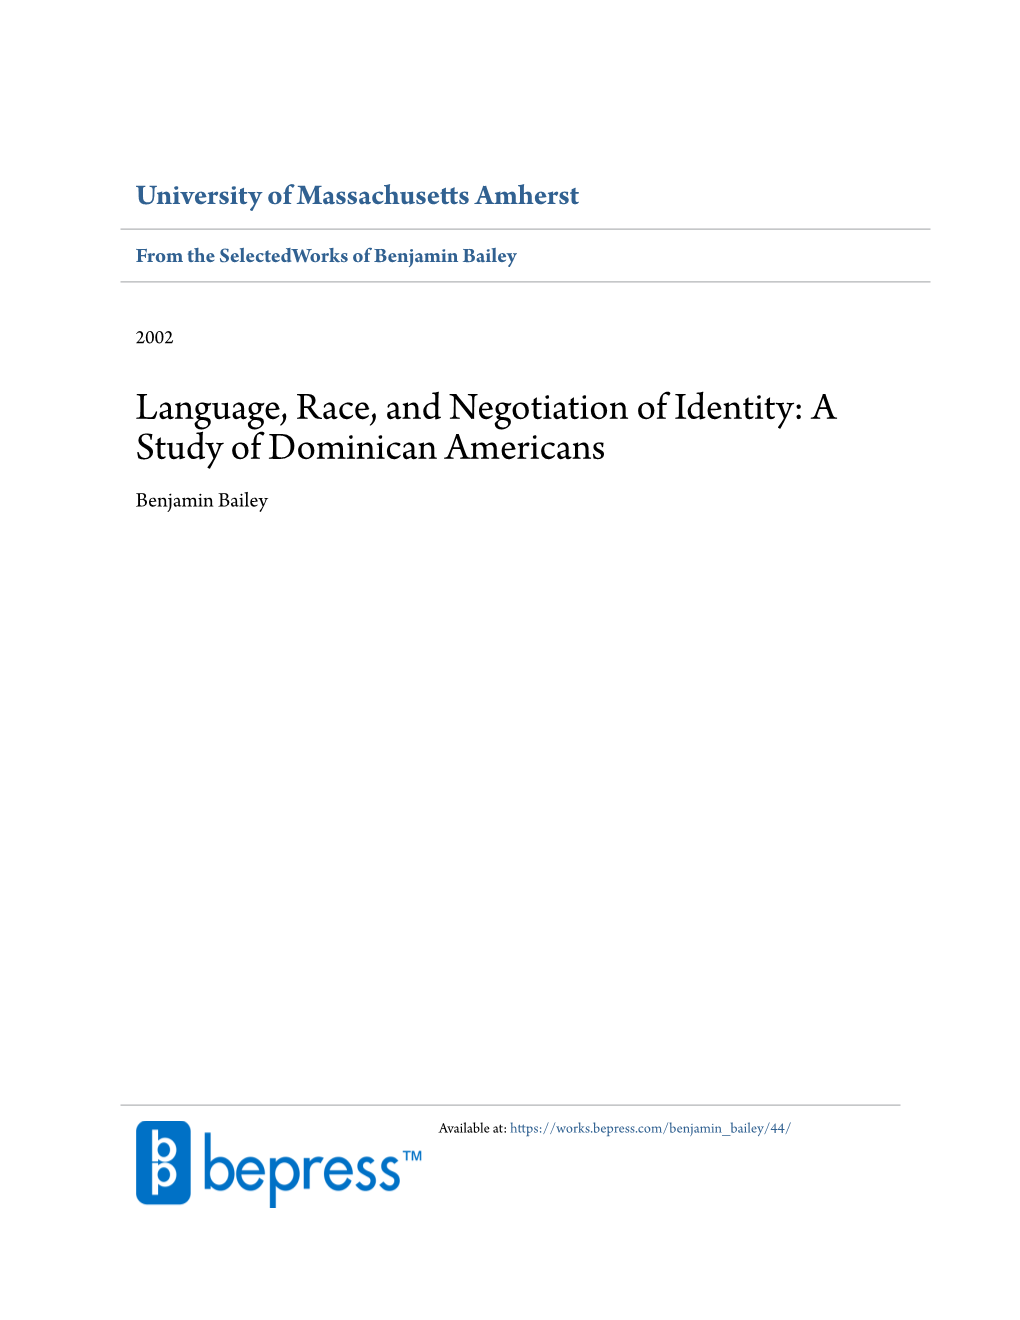 Language, Race, and Negotiation of Identity: a Study of Dominican Americans Benjamin Bailey